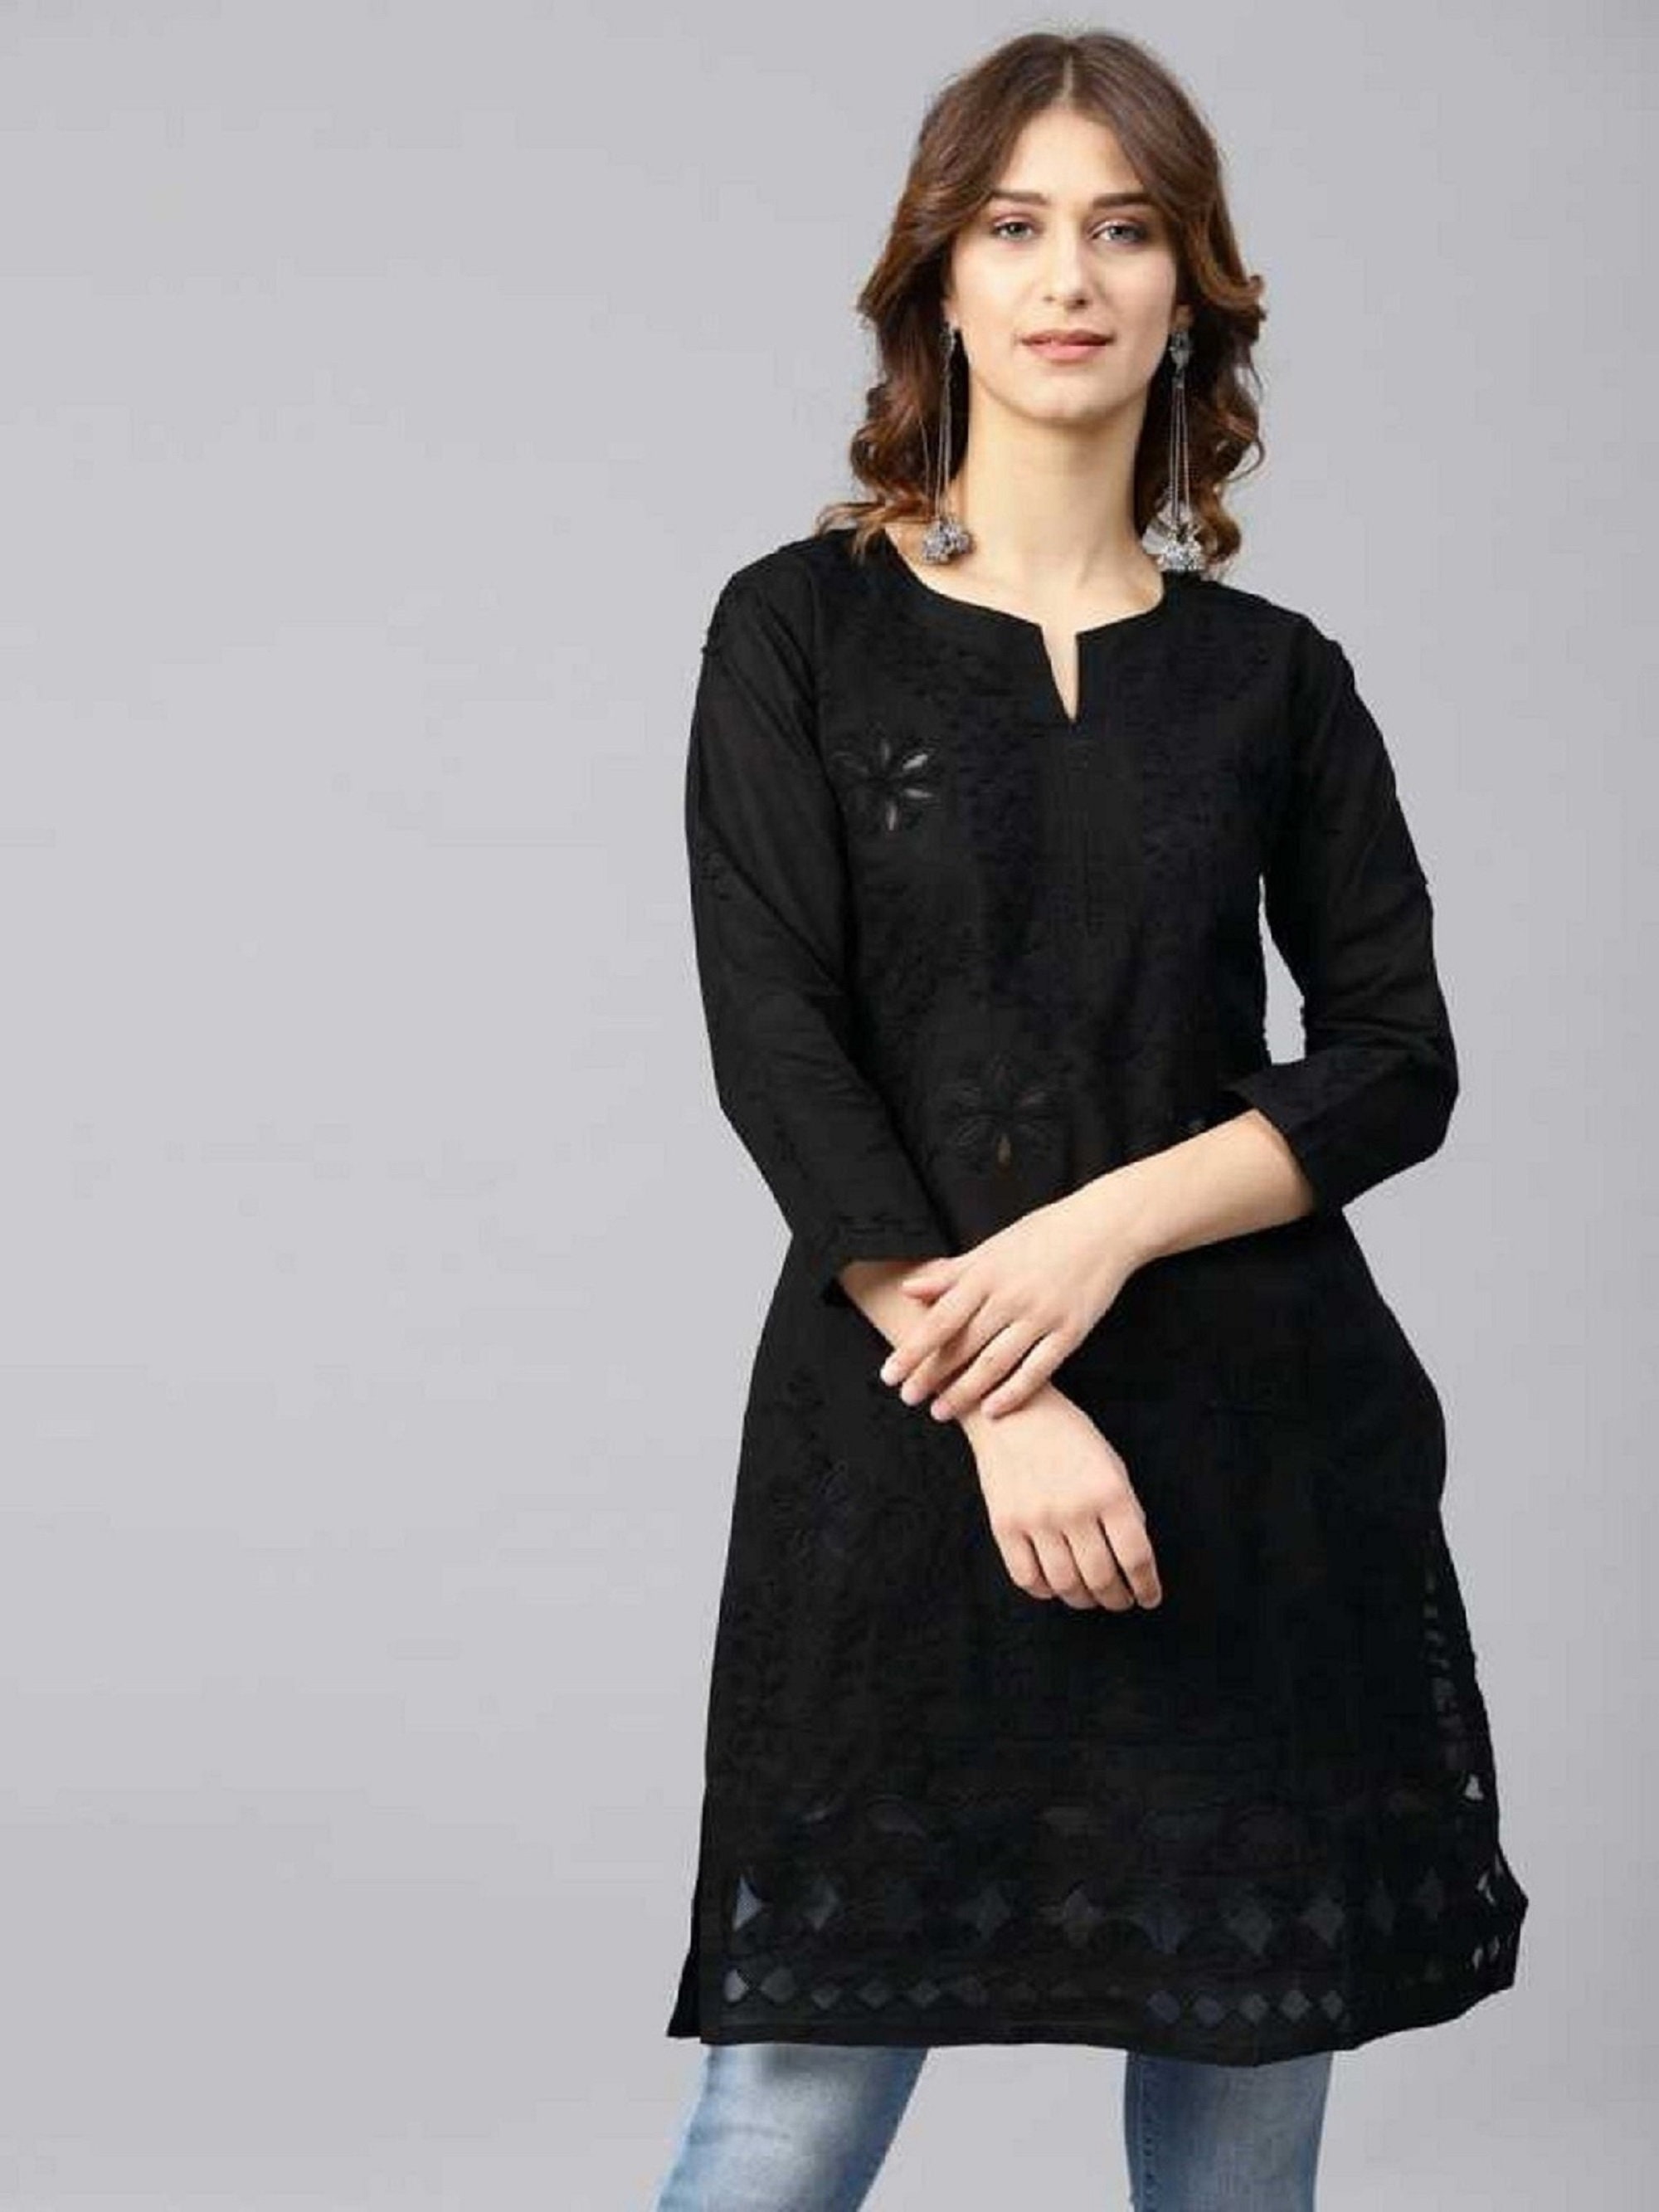 L-Green Chiffon Lucknowi Chikankari Fine Handwork Front Jaal Short Kurti  For Jeans, Wash Care: Handwash at Rs 380 in Lucknow